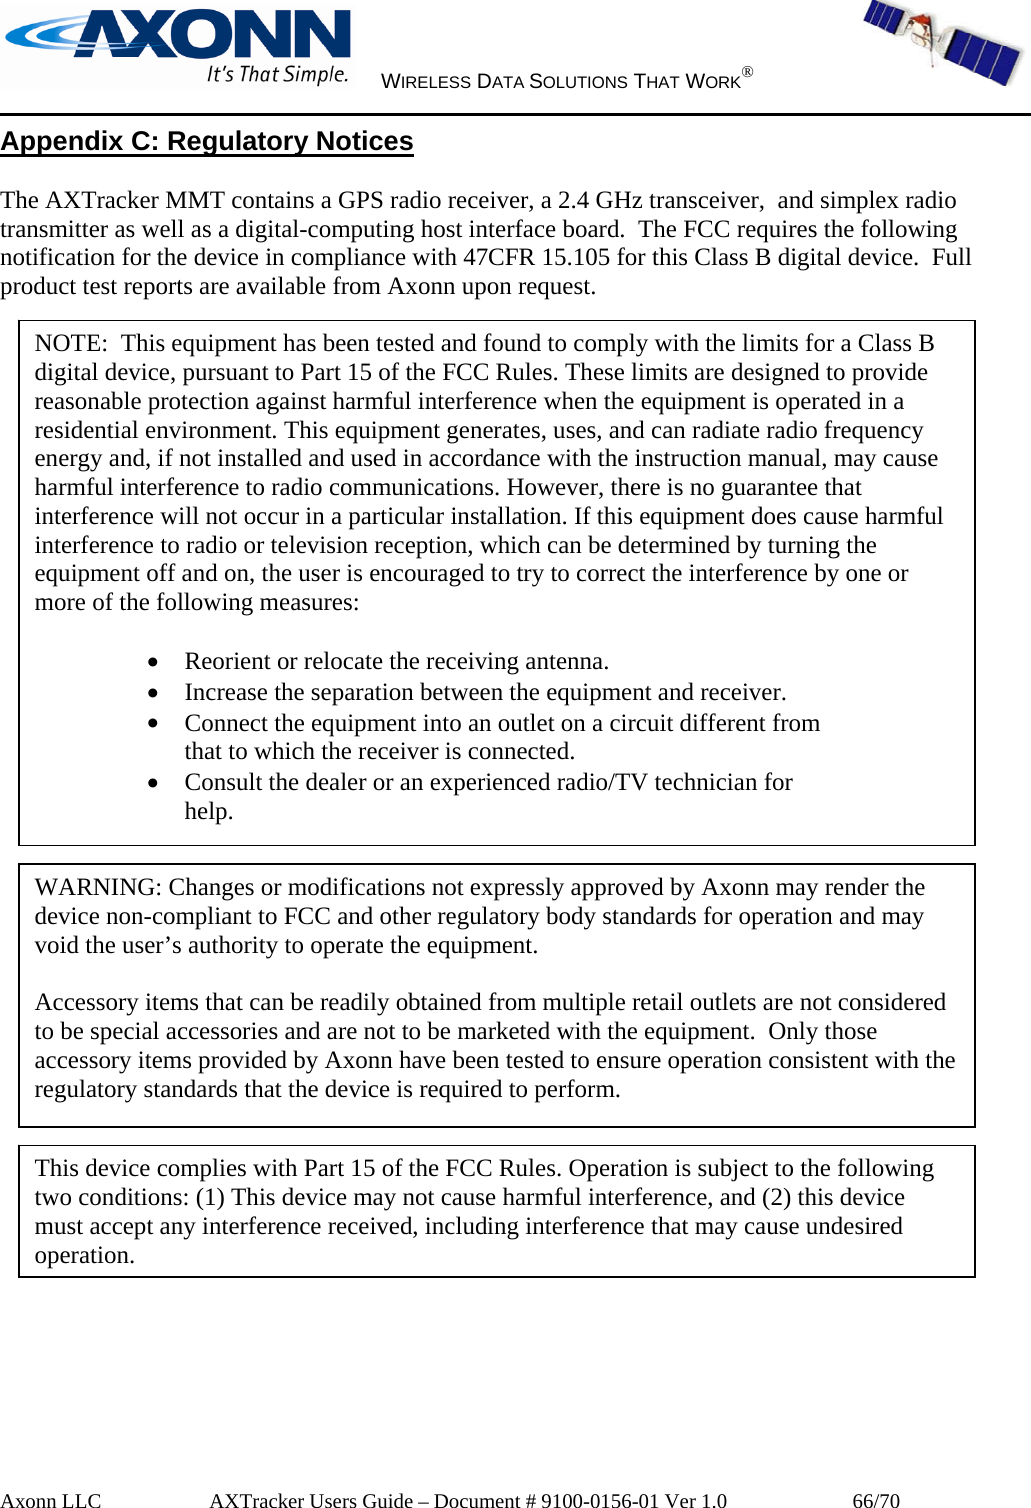     WIRELESS DATA SOLUTIONS THAT WORK®   Axonn LLC         AXTracker Users Guide – Document # 9100-0156-01 Ver 1.0                  66/70 Appendix C: Regulatory Notices  The AXTracker MMT contains a GPS radio receiver, a 2.4 GHz transceiver,  and simplex radio transmitter as well as a digital-computing host interface board.  The FCC requires the following notification for the device in compliance with 47CFR 15.105 for this Class B digital device.  Full product test reports are available from Axonn upon request.                                    NOTE:  This equipment has been tested and found to comply with the limits for a Class B digital device, pursuant to Part 15 of the FCC Rules. These limits are designed to provide reasonable protection against harmful interference when the equipment is operated in a residential environment. This equipment generates, uses, and can radiate radio frequency energy and, if not installed and used in accordance with the instruction manual, may cause harmful interference to radio communications. However, there is no guarantee that interference will not occur in a particular installation. If this equipment does cause harmful interference to radio or television reception, which can be determined by turning the equipment off and on, the user is encouraged to try to correct the interference by one or more of the following measures:  • Reorient or relocate the receiving antenna. • Increase the separation between the equipment and receiver. • Connect the equipment into an outlet on a circuit different from that to which the receiver is connected. • Consult the dealer or an experienced radio/TV technician for help. WARNING: Changes or modifications not expressly approved by Axonn may render the device non-compliant to FCC and other regulatory body standards for operation and may void the user’s authority to operate the equipment.  Accessory items that can be readily obtained from multiple retail outlets are not considered to be special accessories and are not to be marketed with the equipment.  Only those accessory items provided by Axonn have been tested to ensure operation consistent with the regulatory standards that the device is required to perform. This device complies with Part 15 of the FCC Rules. Operation is subject to the following two conditions: (1) This device may not cause harmful interference, and (2) this device must accept any interference received, including interference that may cause undesired operation. 